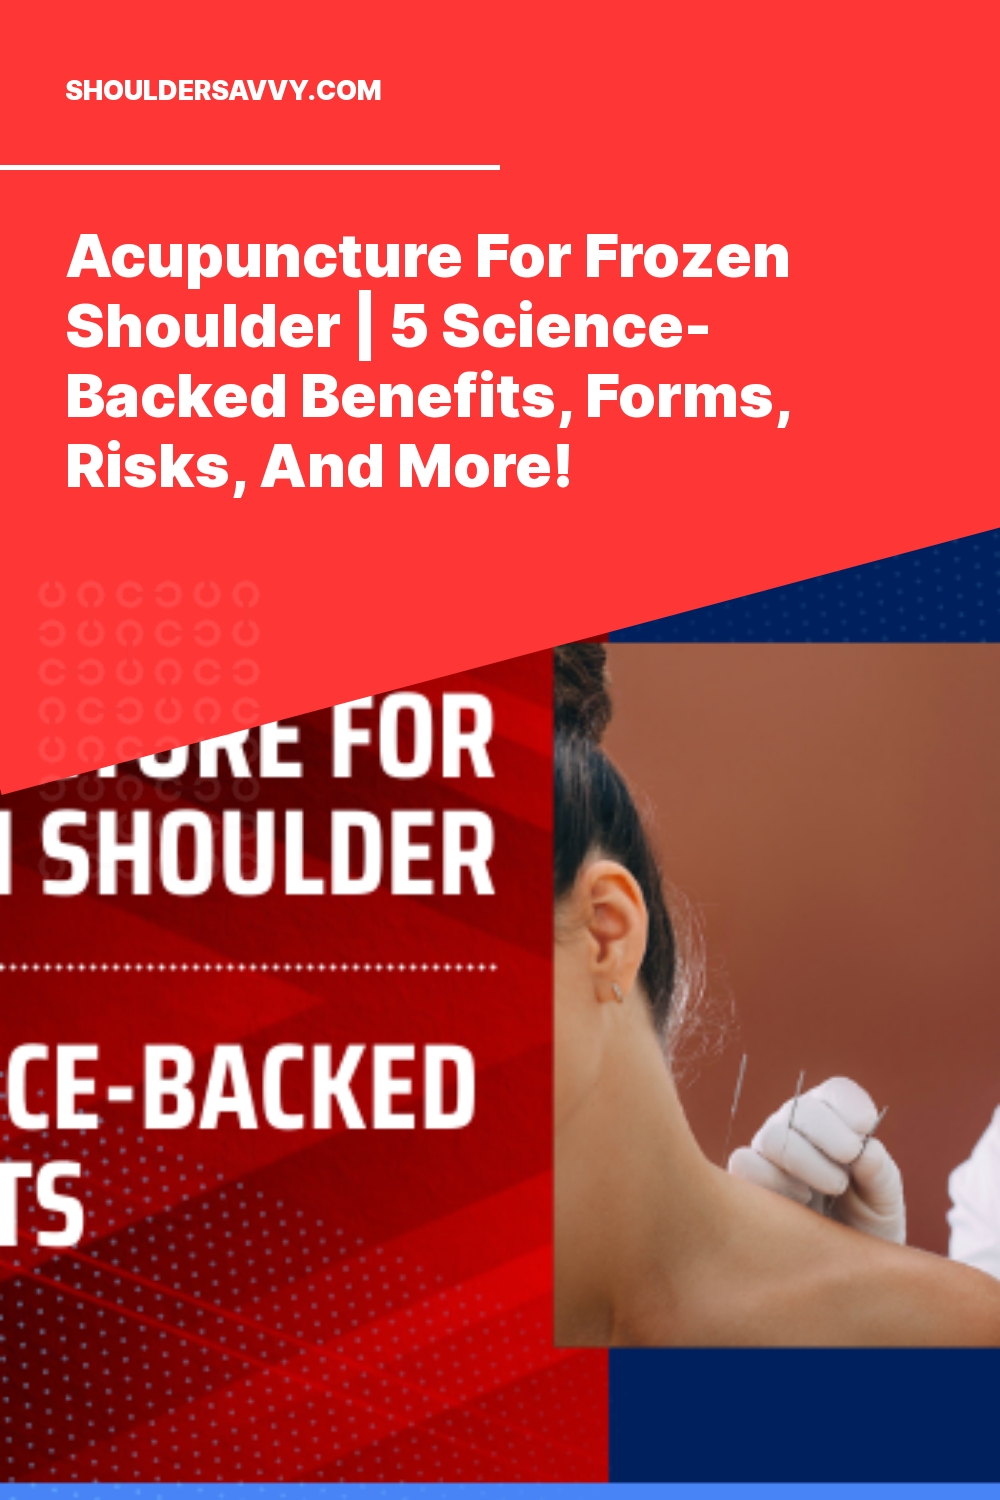 Acupuncture For Frozen Shoulder | 5 Science-Backed Benefits, Forms, Risks, And More!